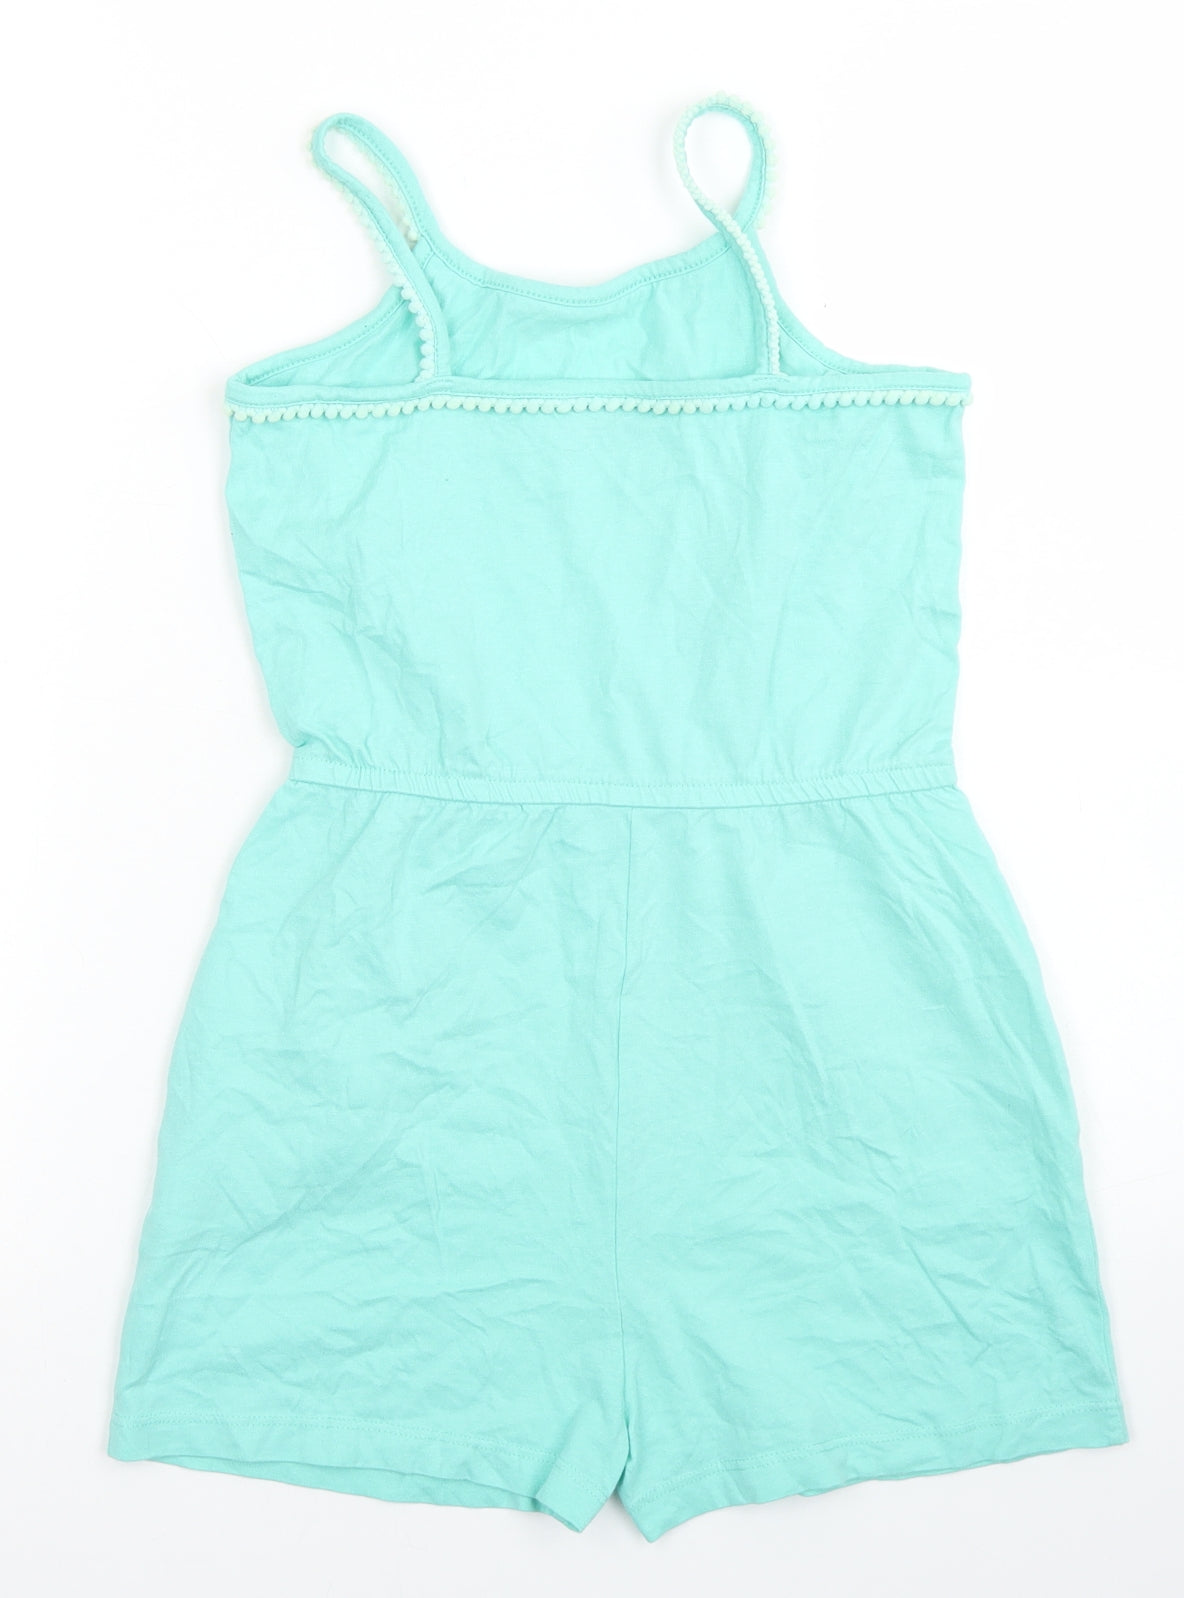 Matalan Girls Blue  Cotton Playsuit One-Piece Size 10 Years